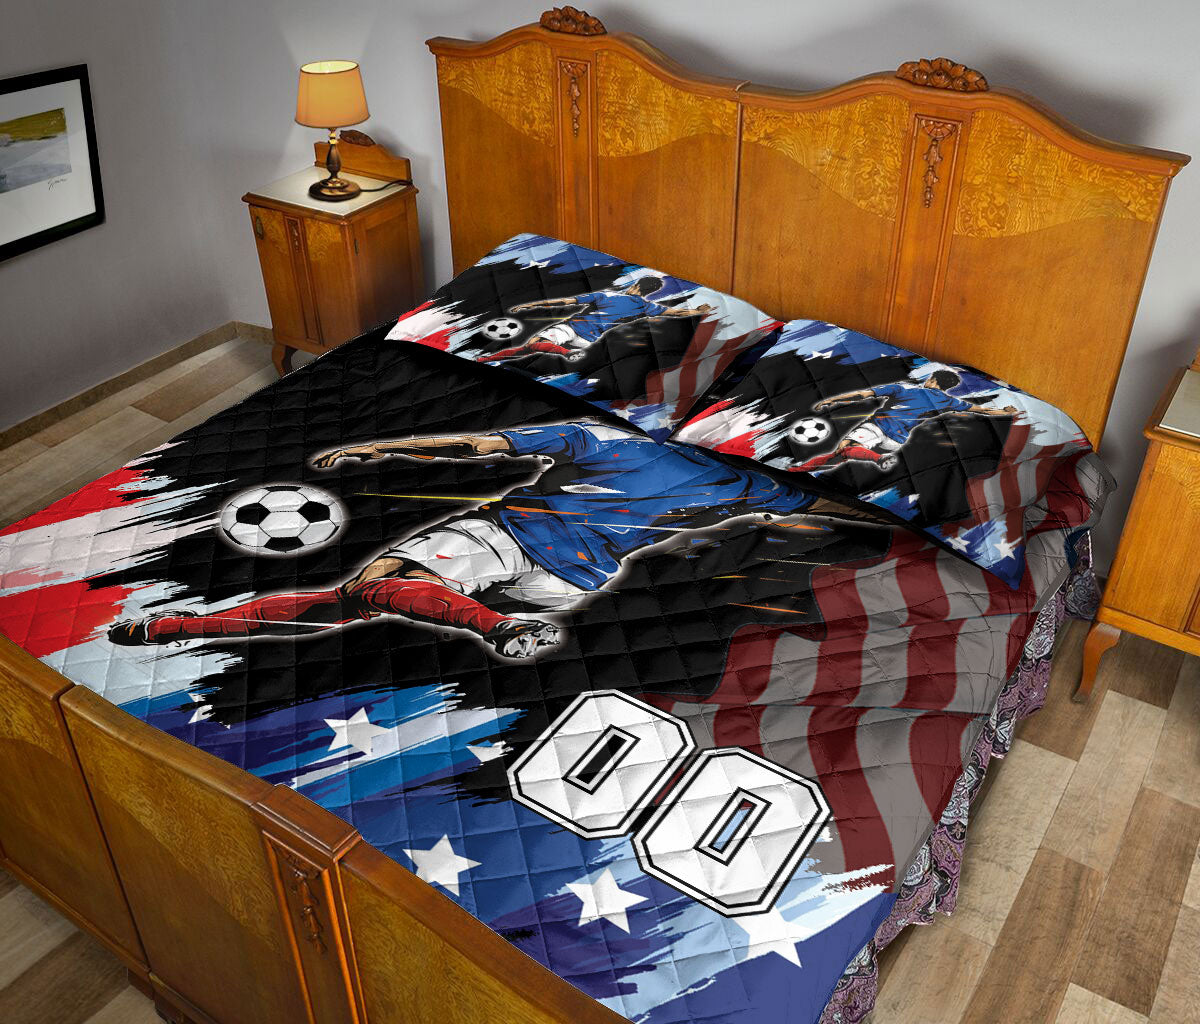 Ohaprints-Quilt-Bed-Set-Pillowcase-Soccer-American-Flag-Pattern-Sport-Gift-Custom-Personalized-Name-Number-Blanket-Bedspread-Bedding-3041-Queen (80'' x 90'')